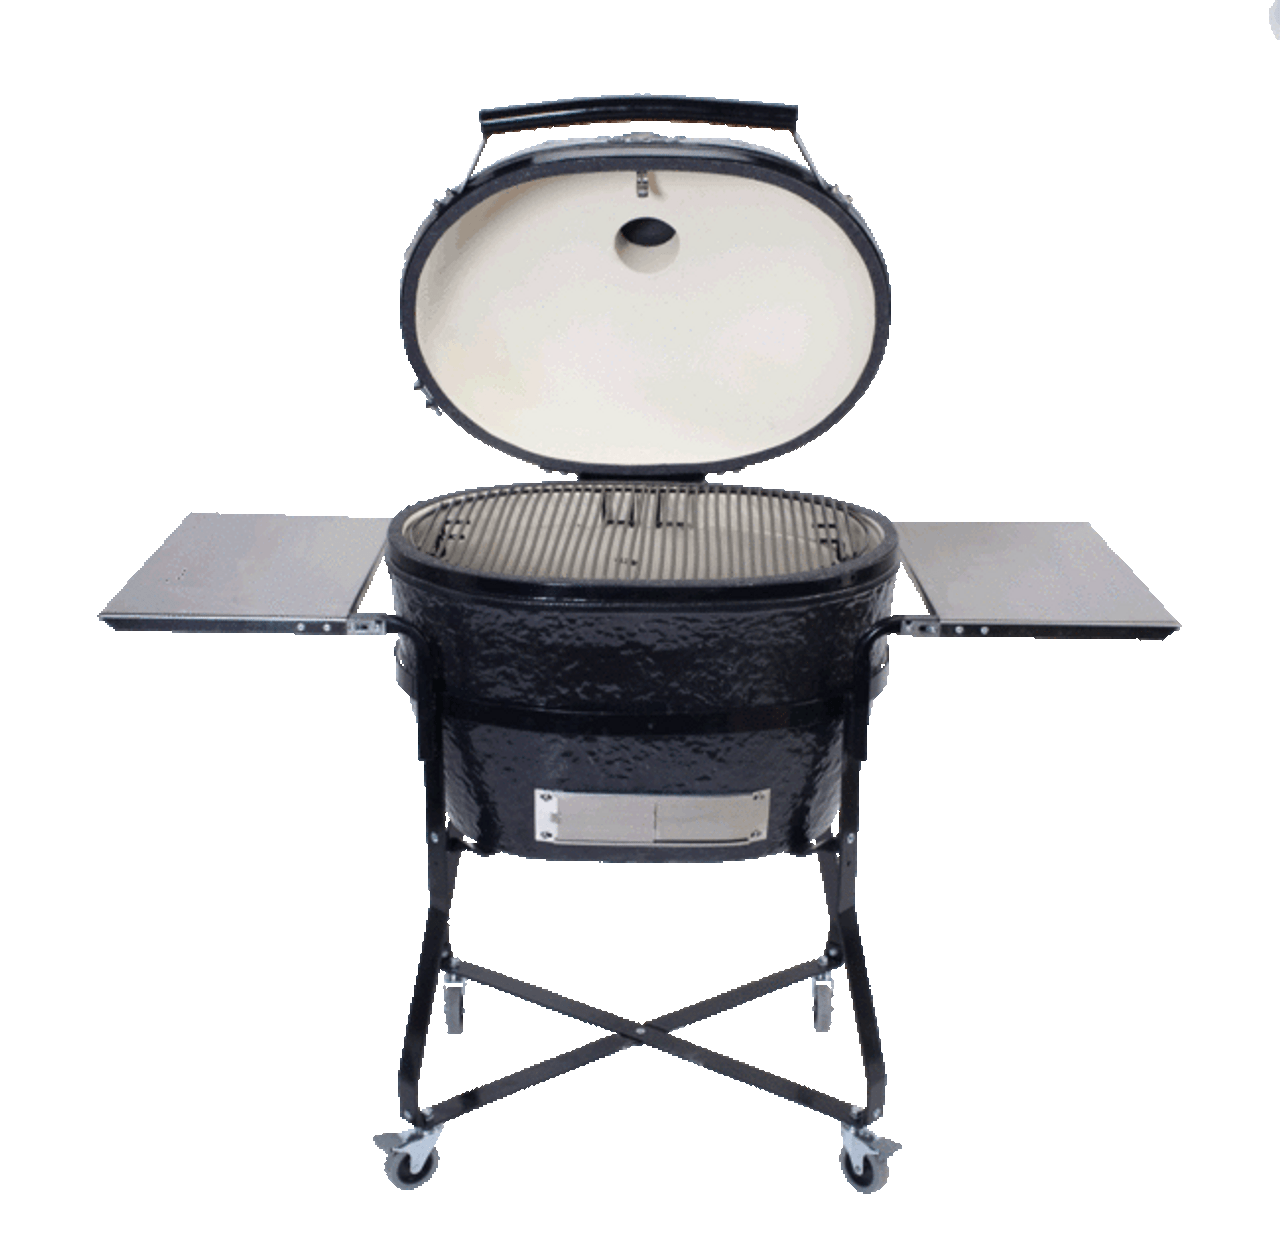 https://cdn11.bigcommerce.com/s-u06mjw/images/stencil/1280x1280/products/860/8856/primo-grills-and-smokers-primo-oval-xl-ceramic-grill-model-778__47181.1610926624.gif?c=2?imbypass=on